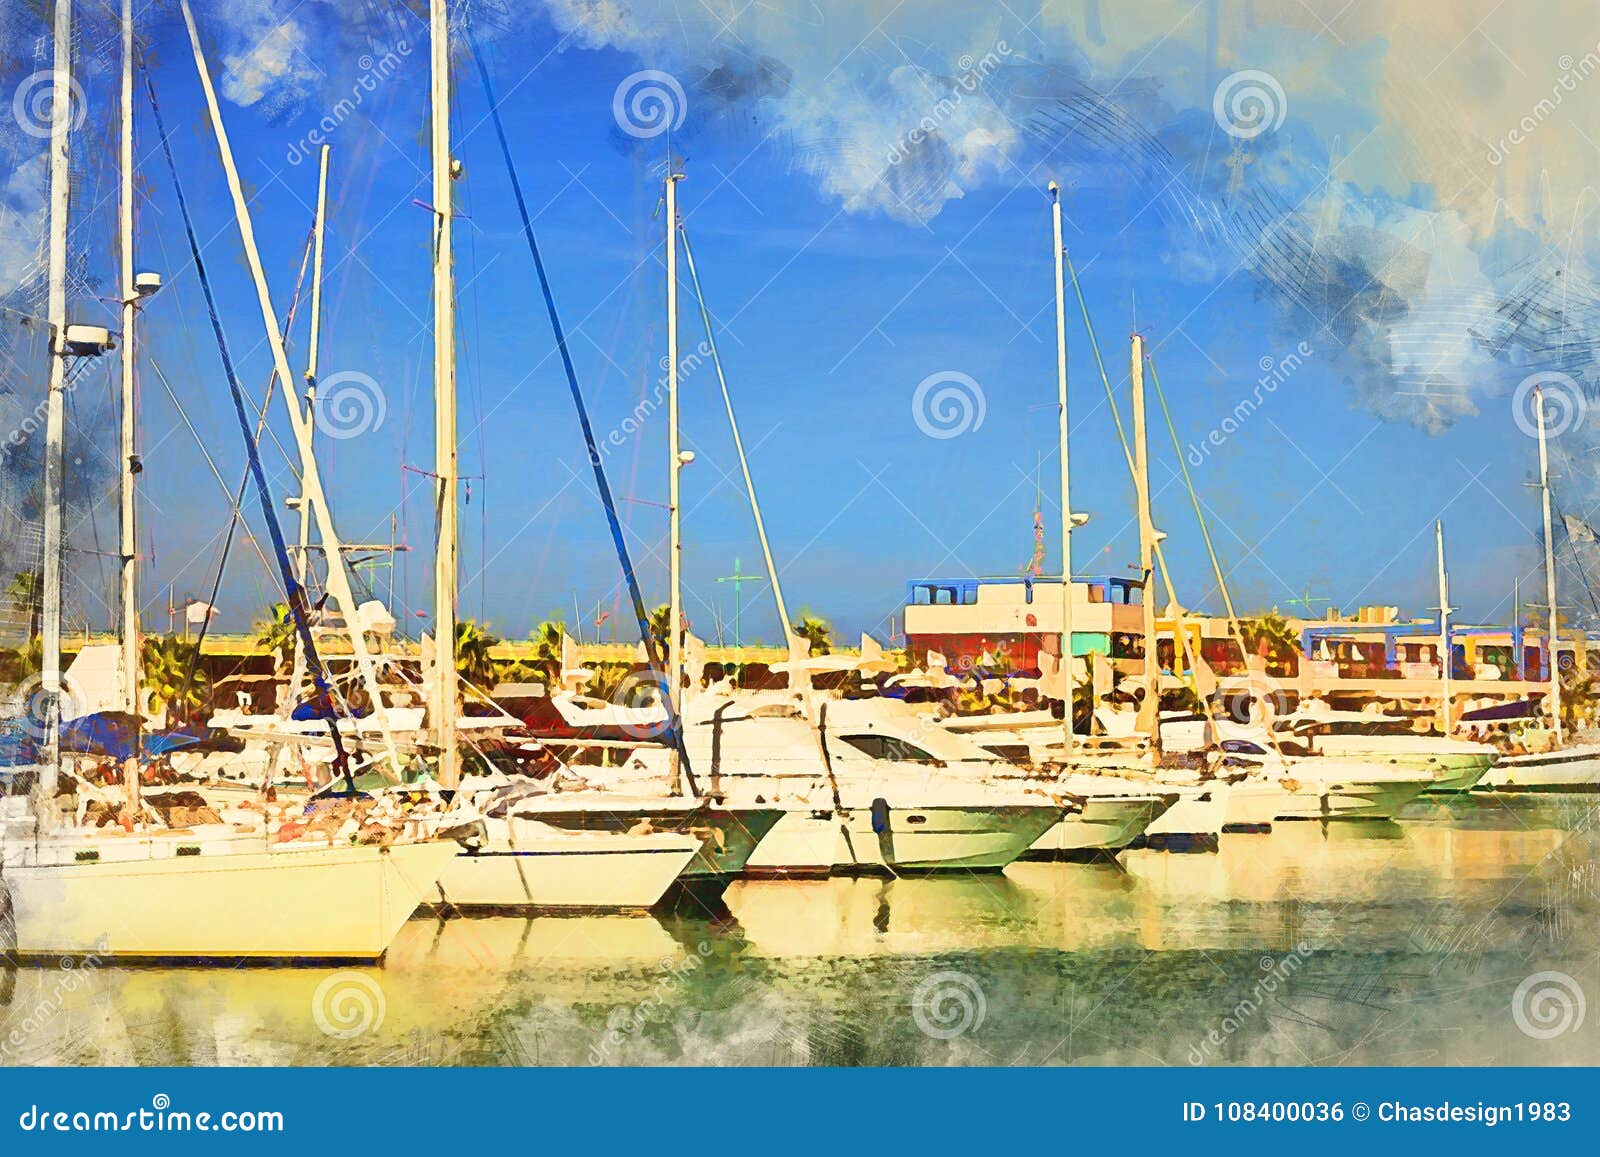 yachts and boats in torrevieja